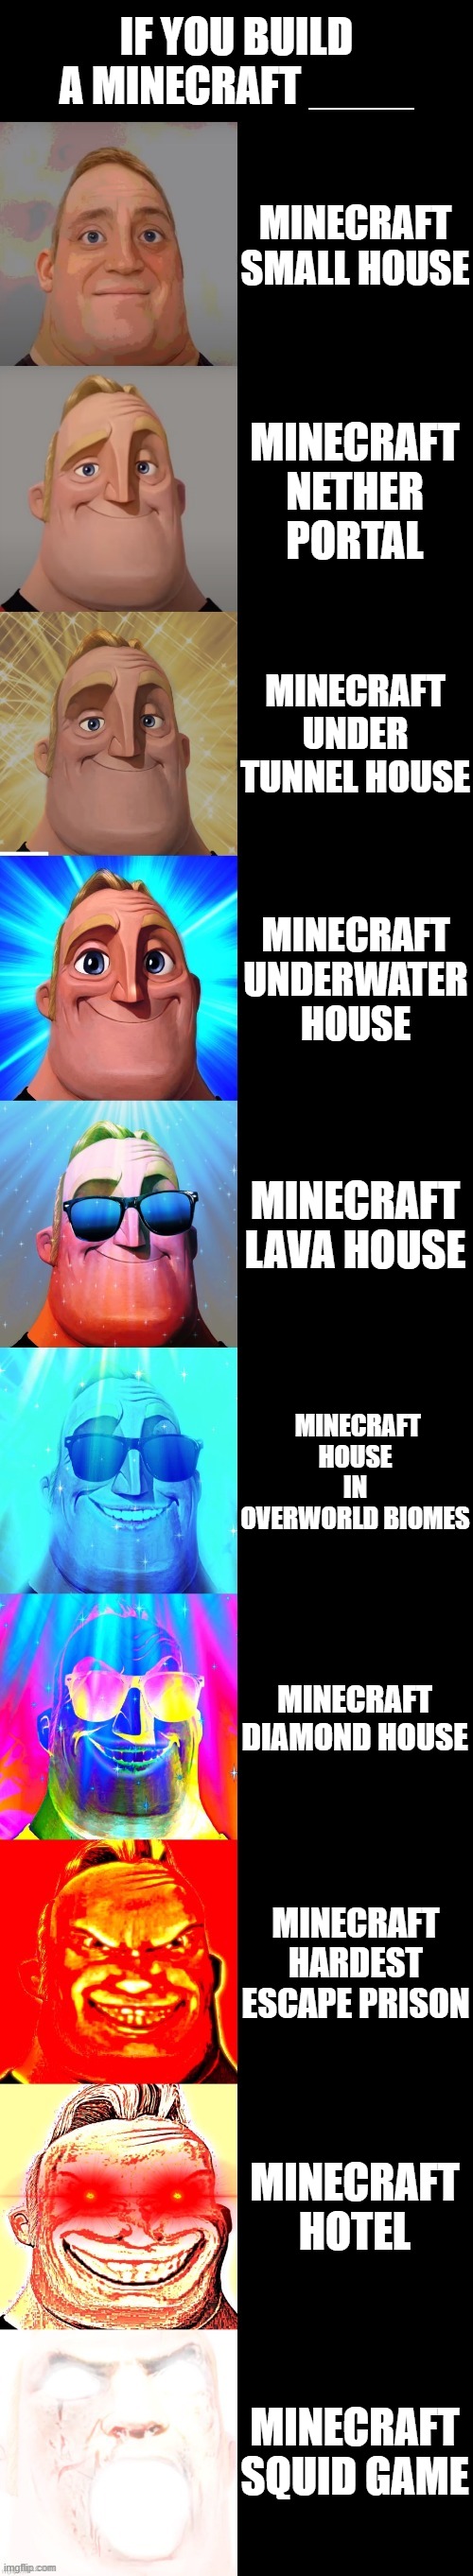 mr incredible becoming canny | IF YOU BUILD A MINECRAFT ____; MINECRAFT SMALL HOUSE; MINECRAFT NETHER PORTAL; MINECRAFT UNDER TUNNEL HOUSE; MINECRAFT UNDERWATER HOUSE; MINECRAFT LAVA HOUSE; MINECRAFT HOUSE IN OVERWORLD BIOMES; MINECRAFT DIAMOND HOUSE; MINECRAFT HARDEST ESCAPE PRISON; MINECRAFT HOTEL; MINECRAFT SQUID GAME | image tagged in mr incredible becoming canny | made w/ Imgflip meme maker